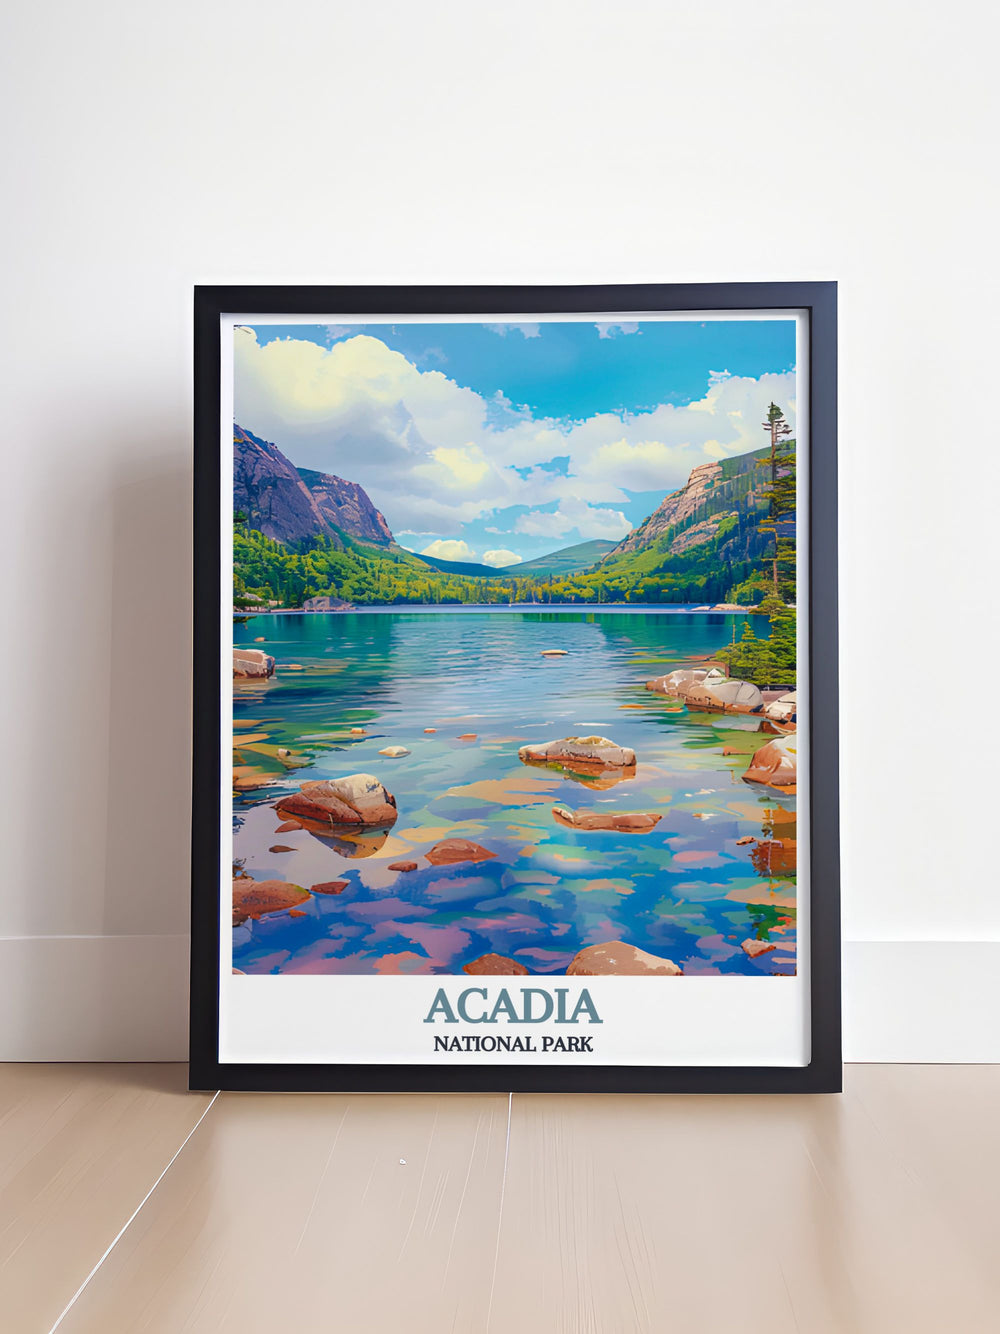 Beautiful retro travel print featuring Jordan Pond in Acadia National Park perfect for creating a peaceful atmosphere in any room vintage design capturing the essence of one of the most beloved US national parks ideal for home or office decor.